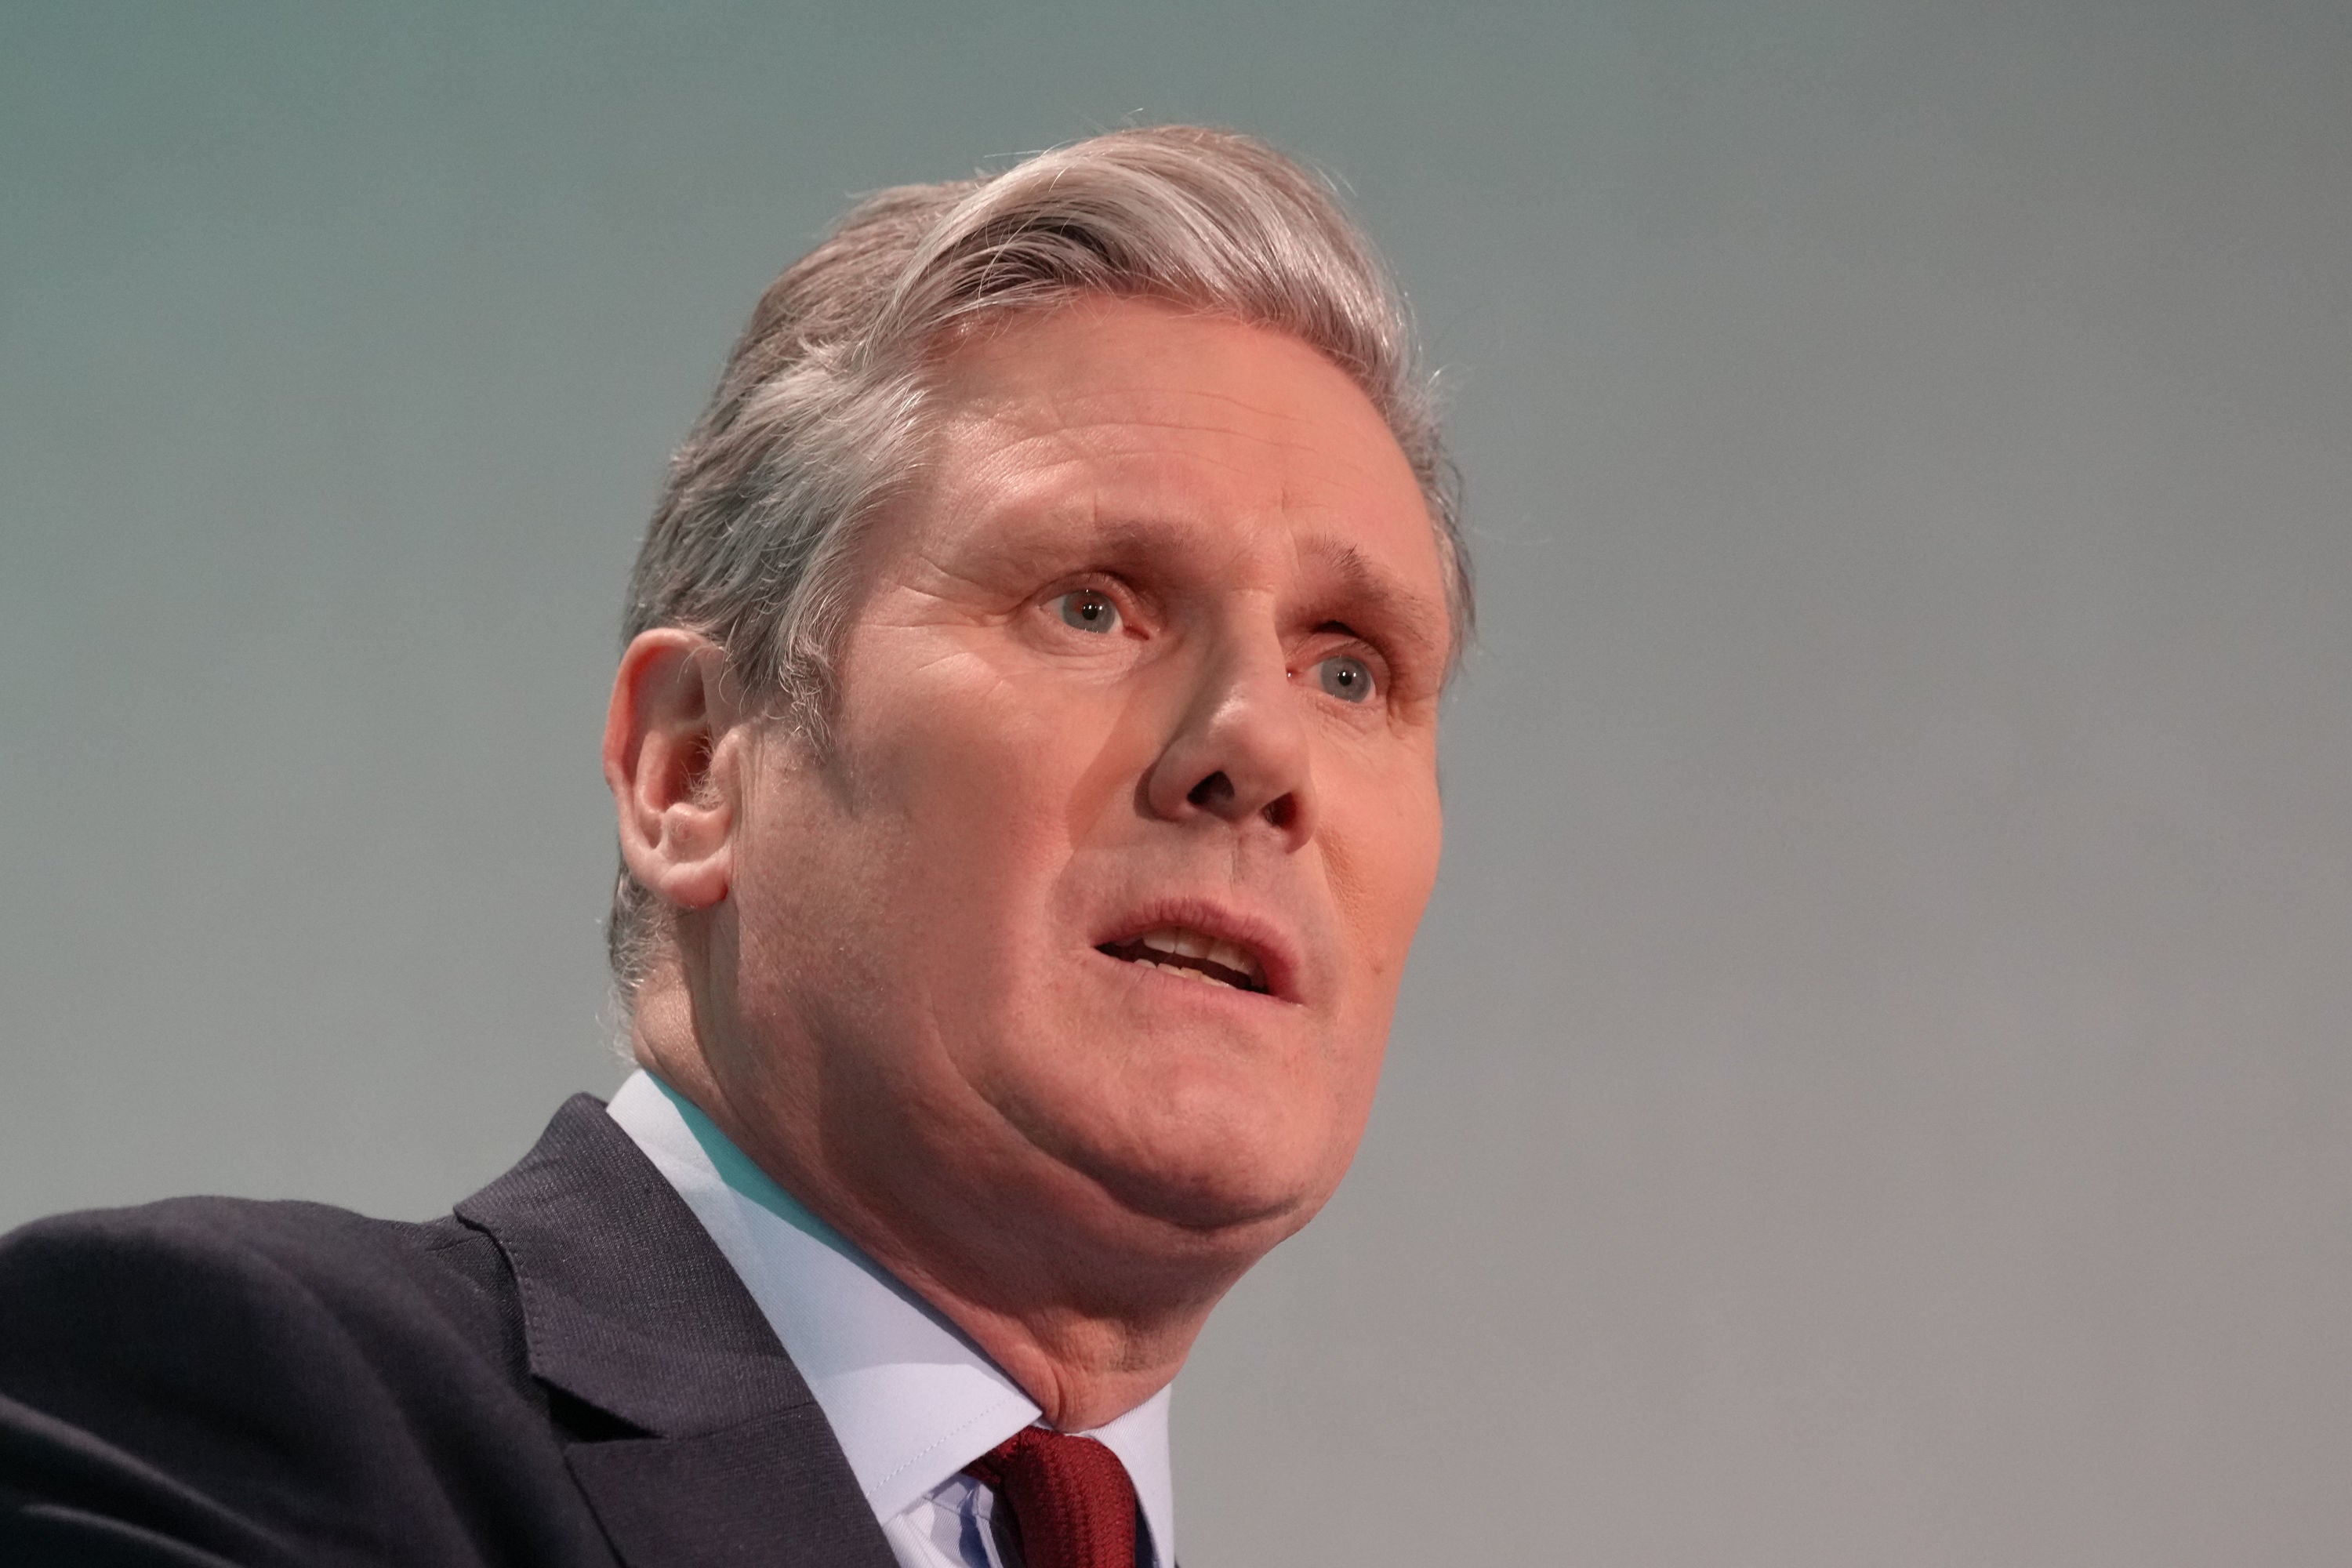 Sir Kier Starmer is currently on course to win power, commanding an 18-point lead